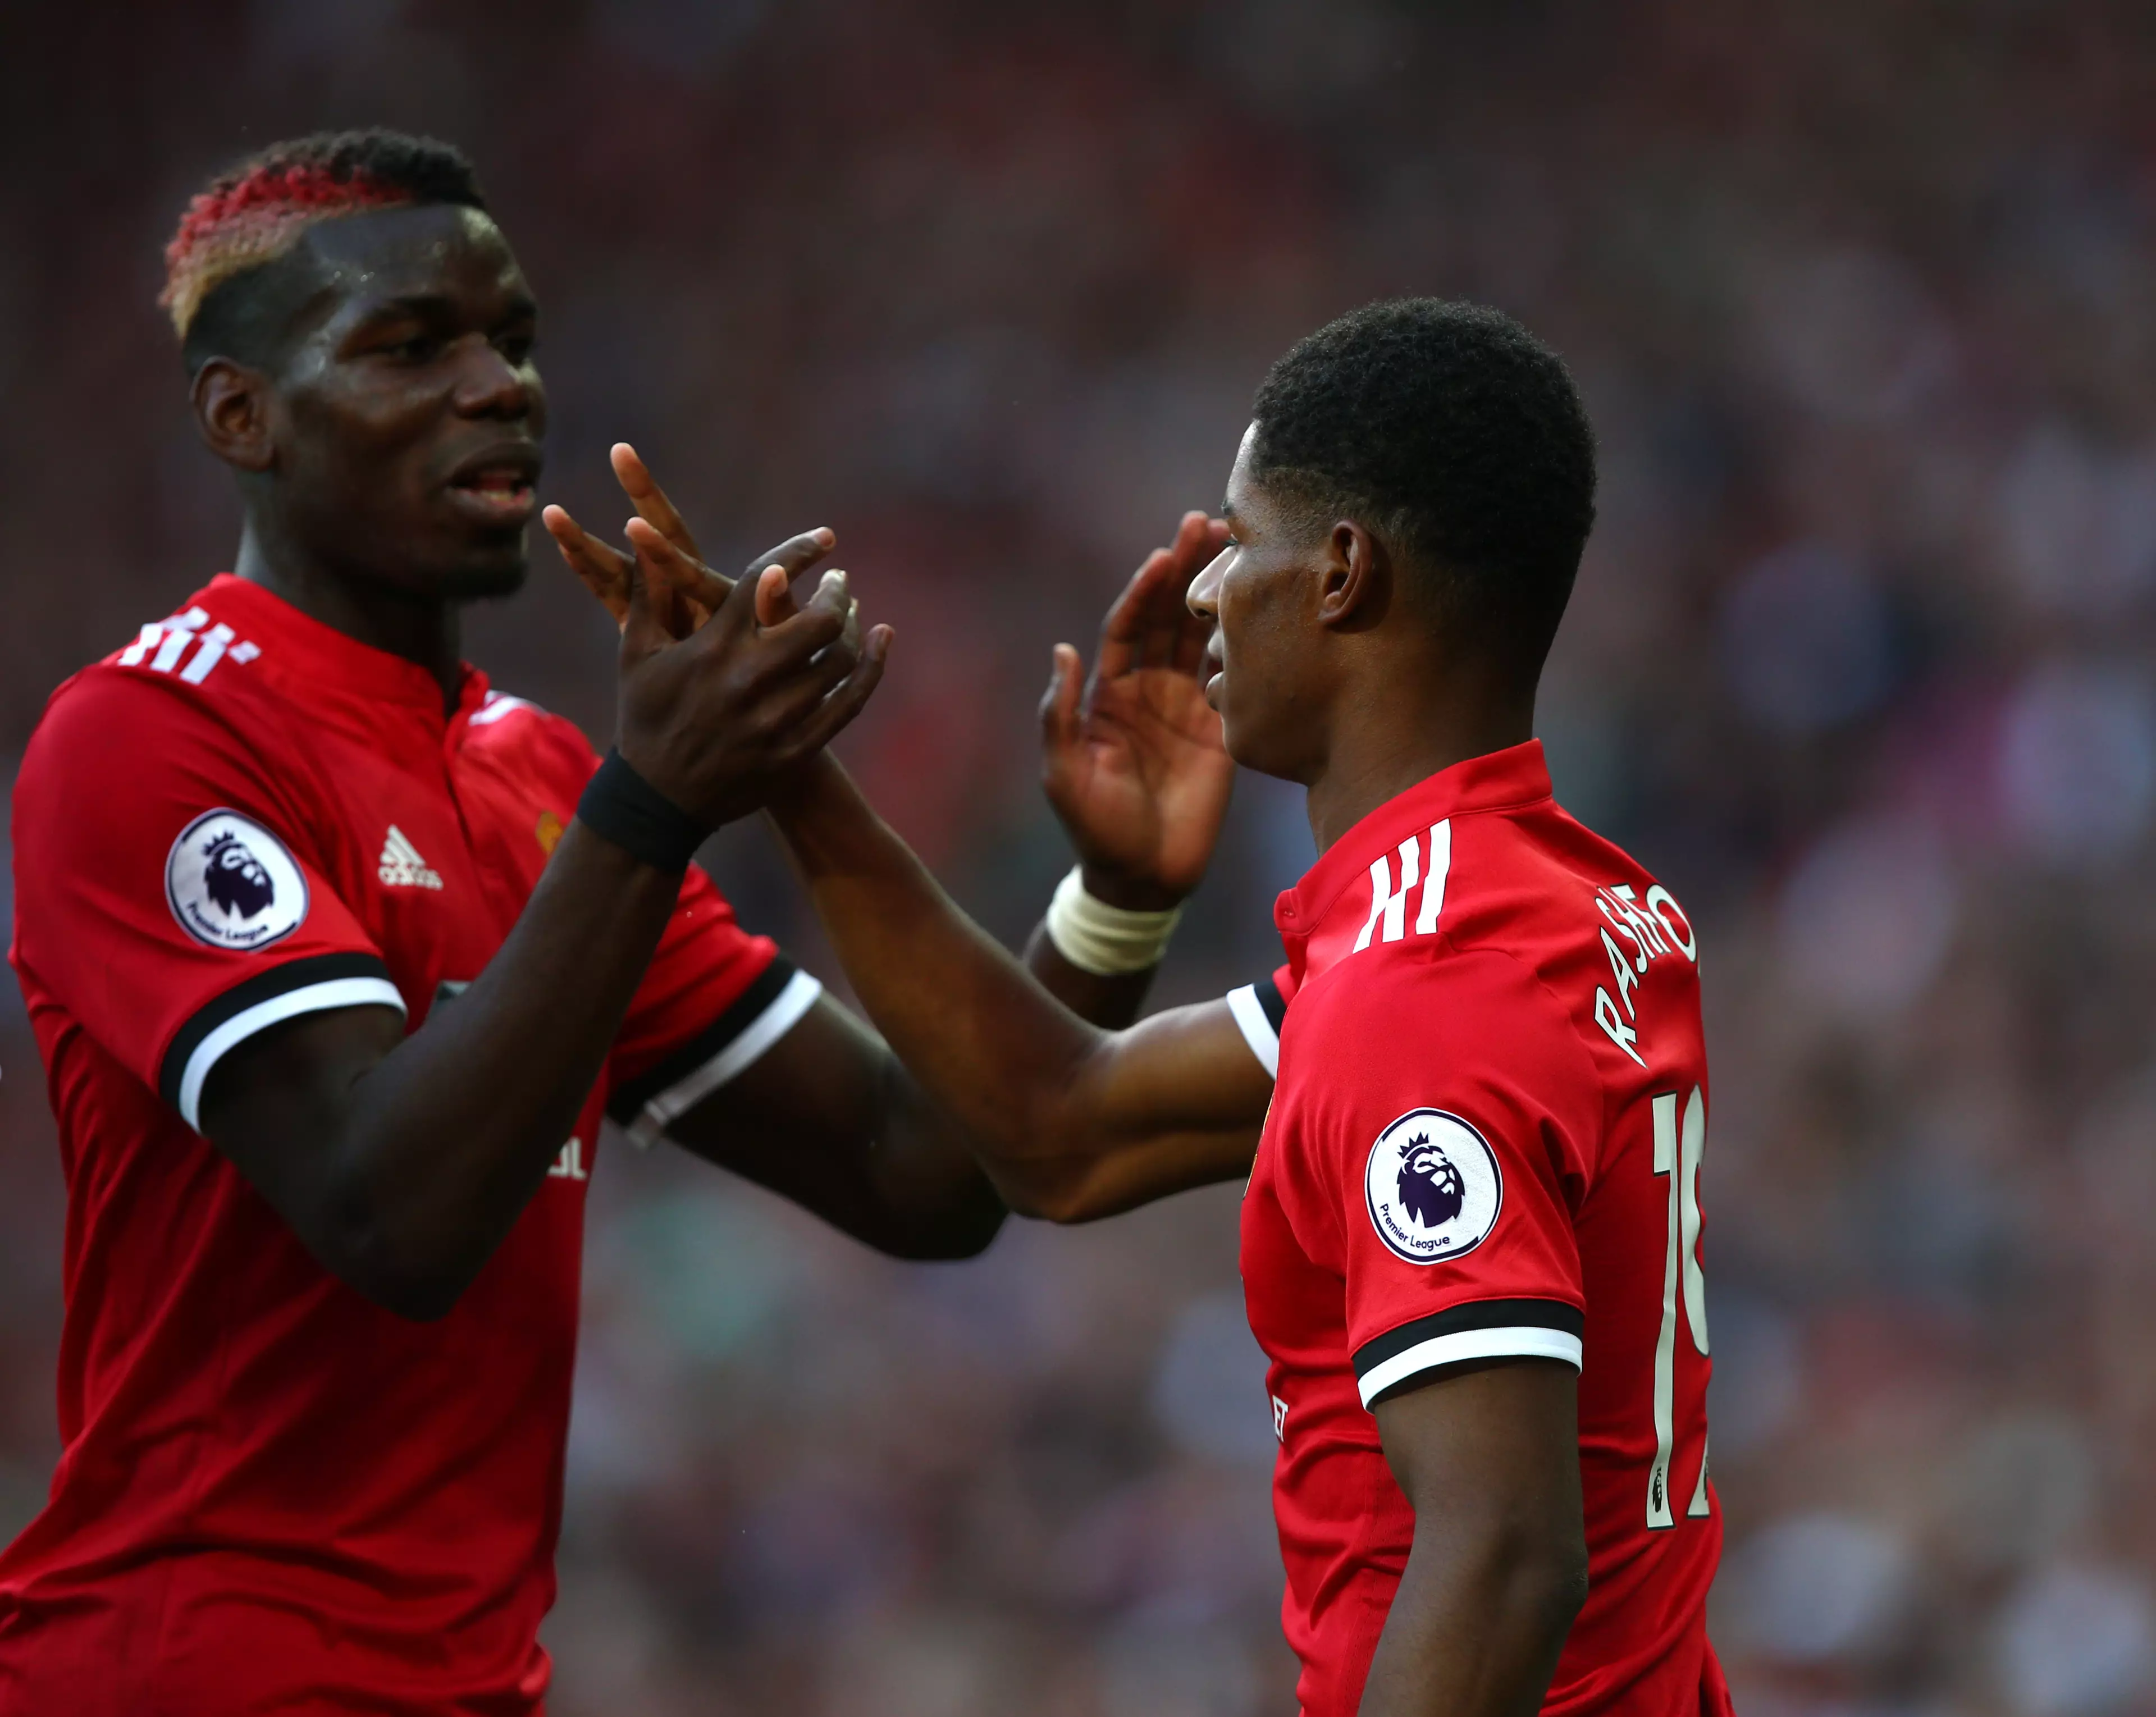 Pogba and Rashford's resurgence has been part of the catalyst for United's change in fortunes. Image: PA Images